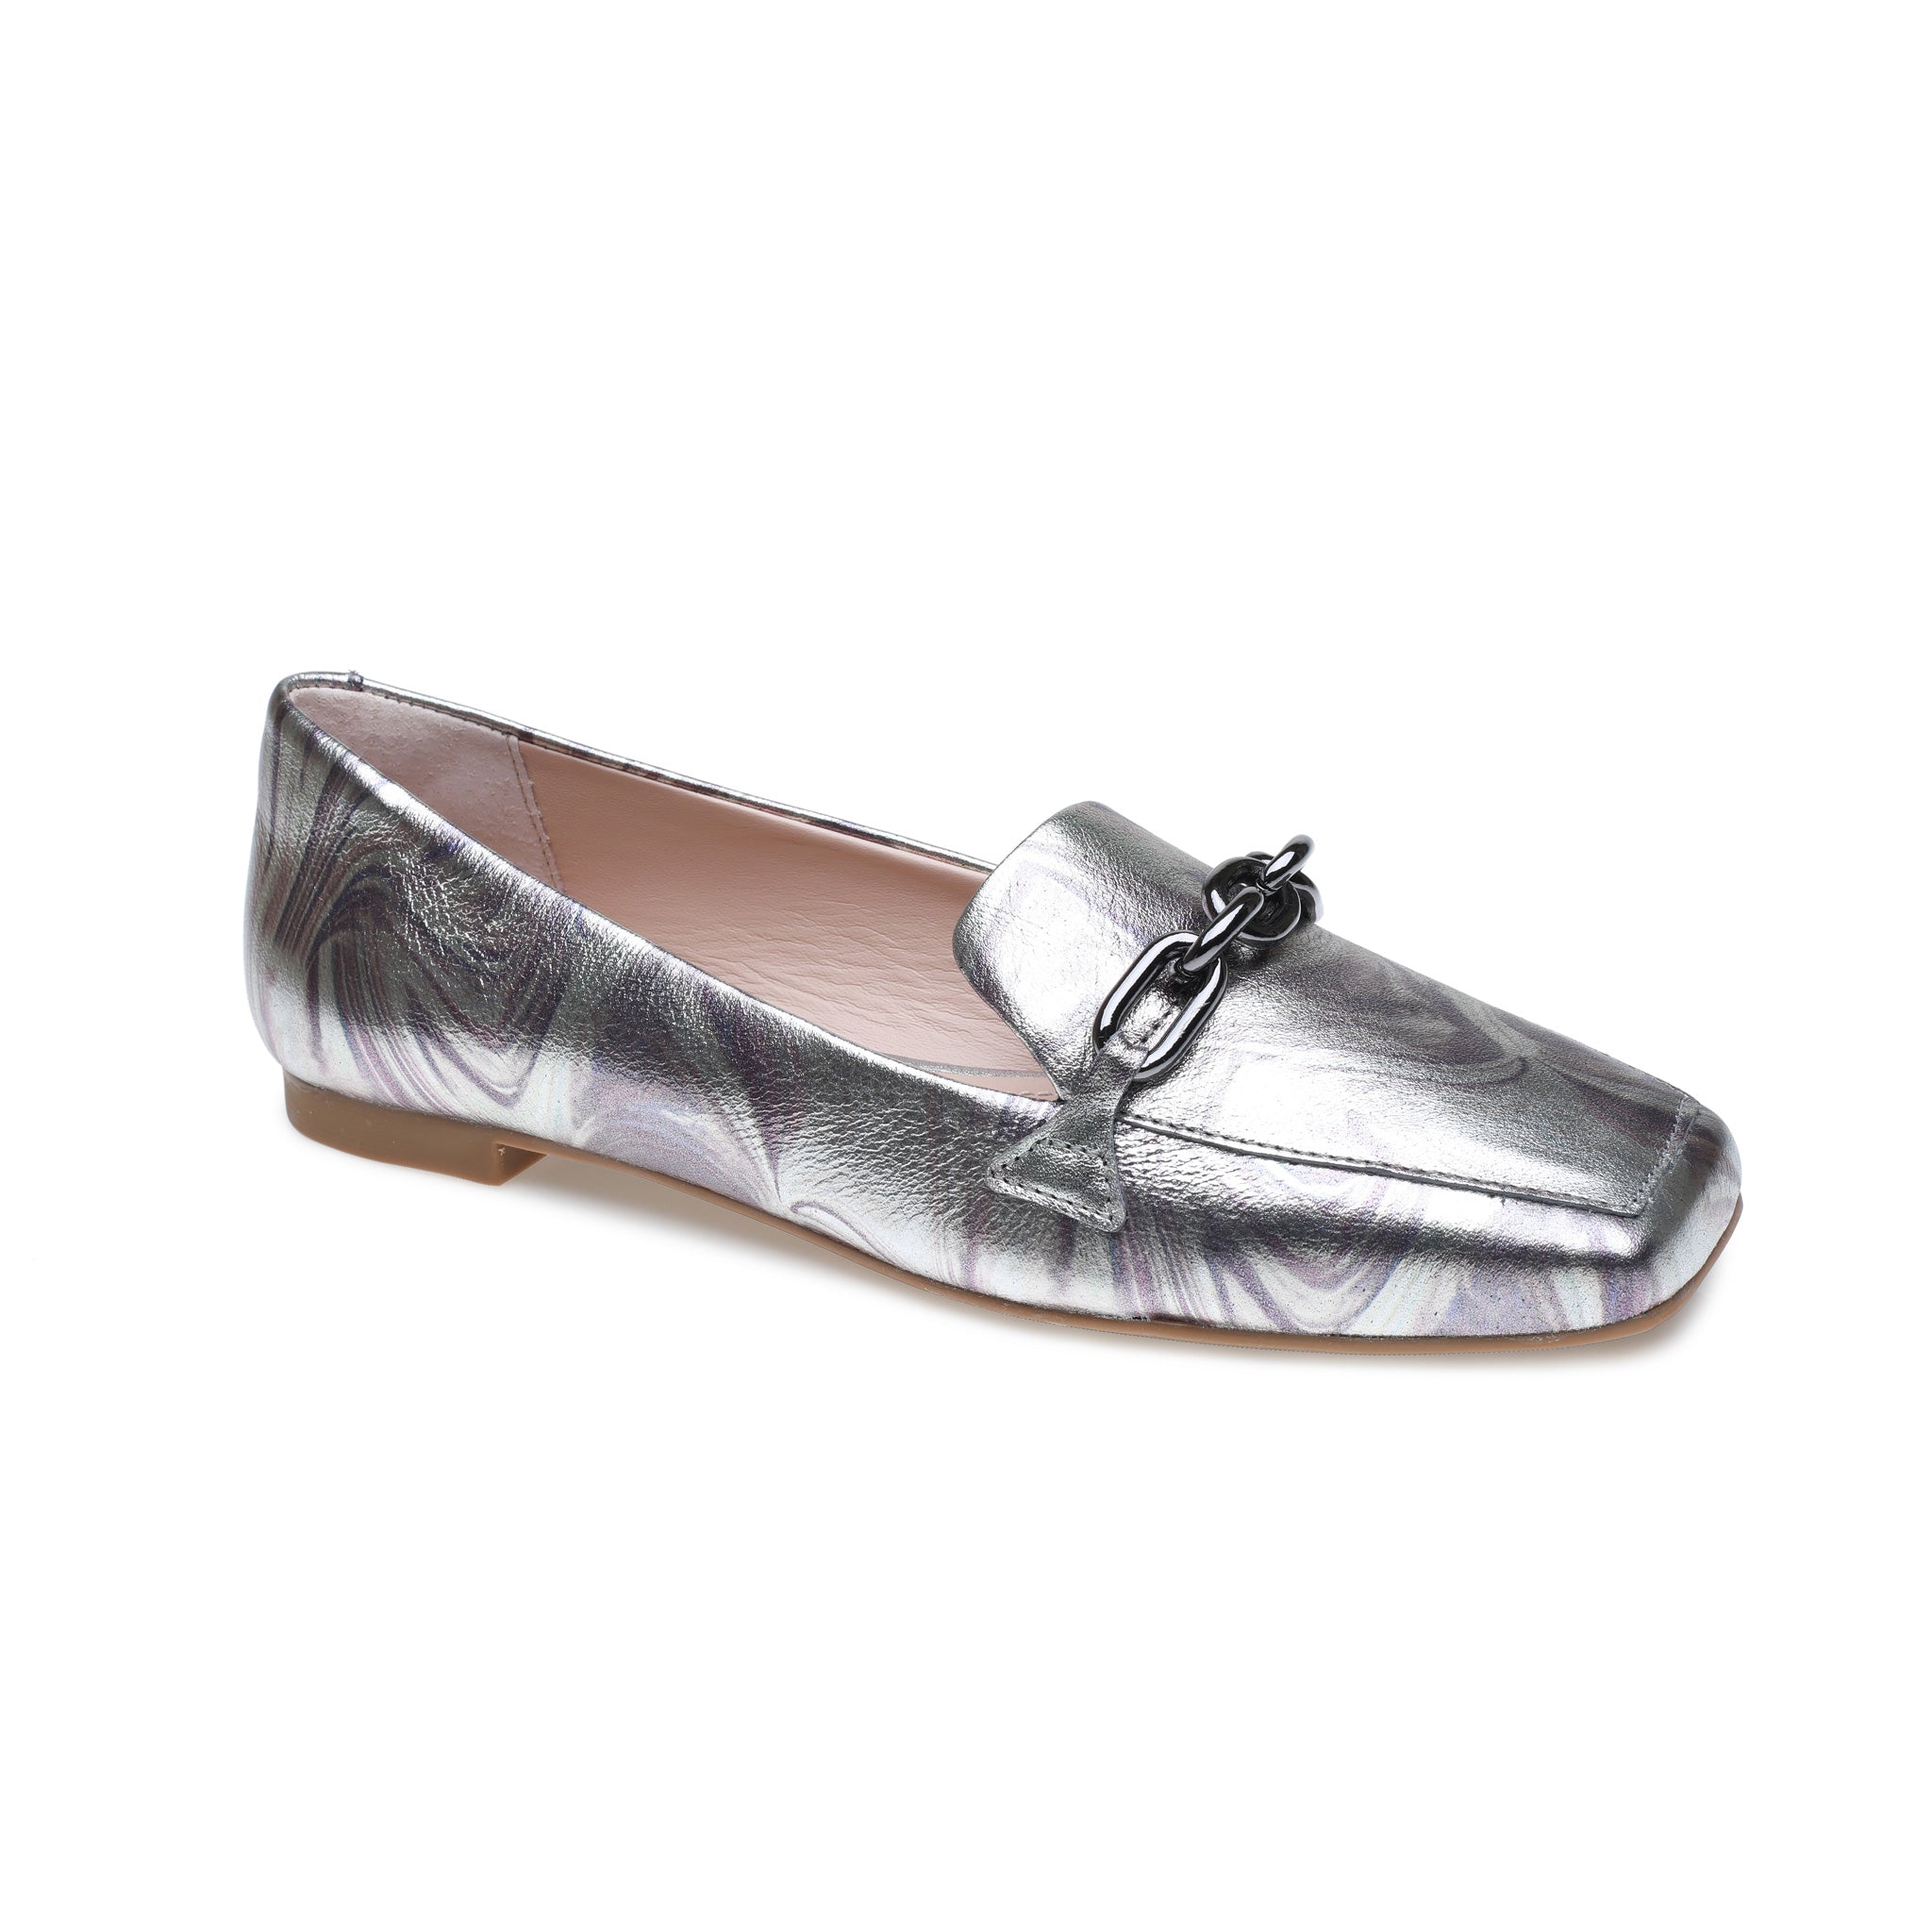 Pewter Swirl Loafer